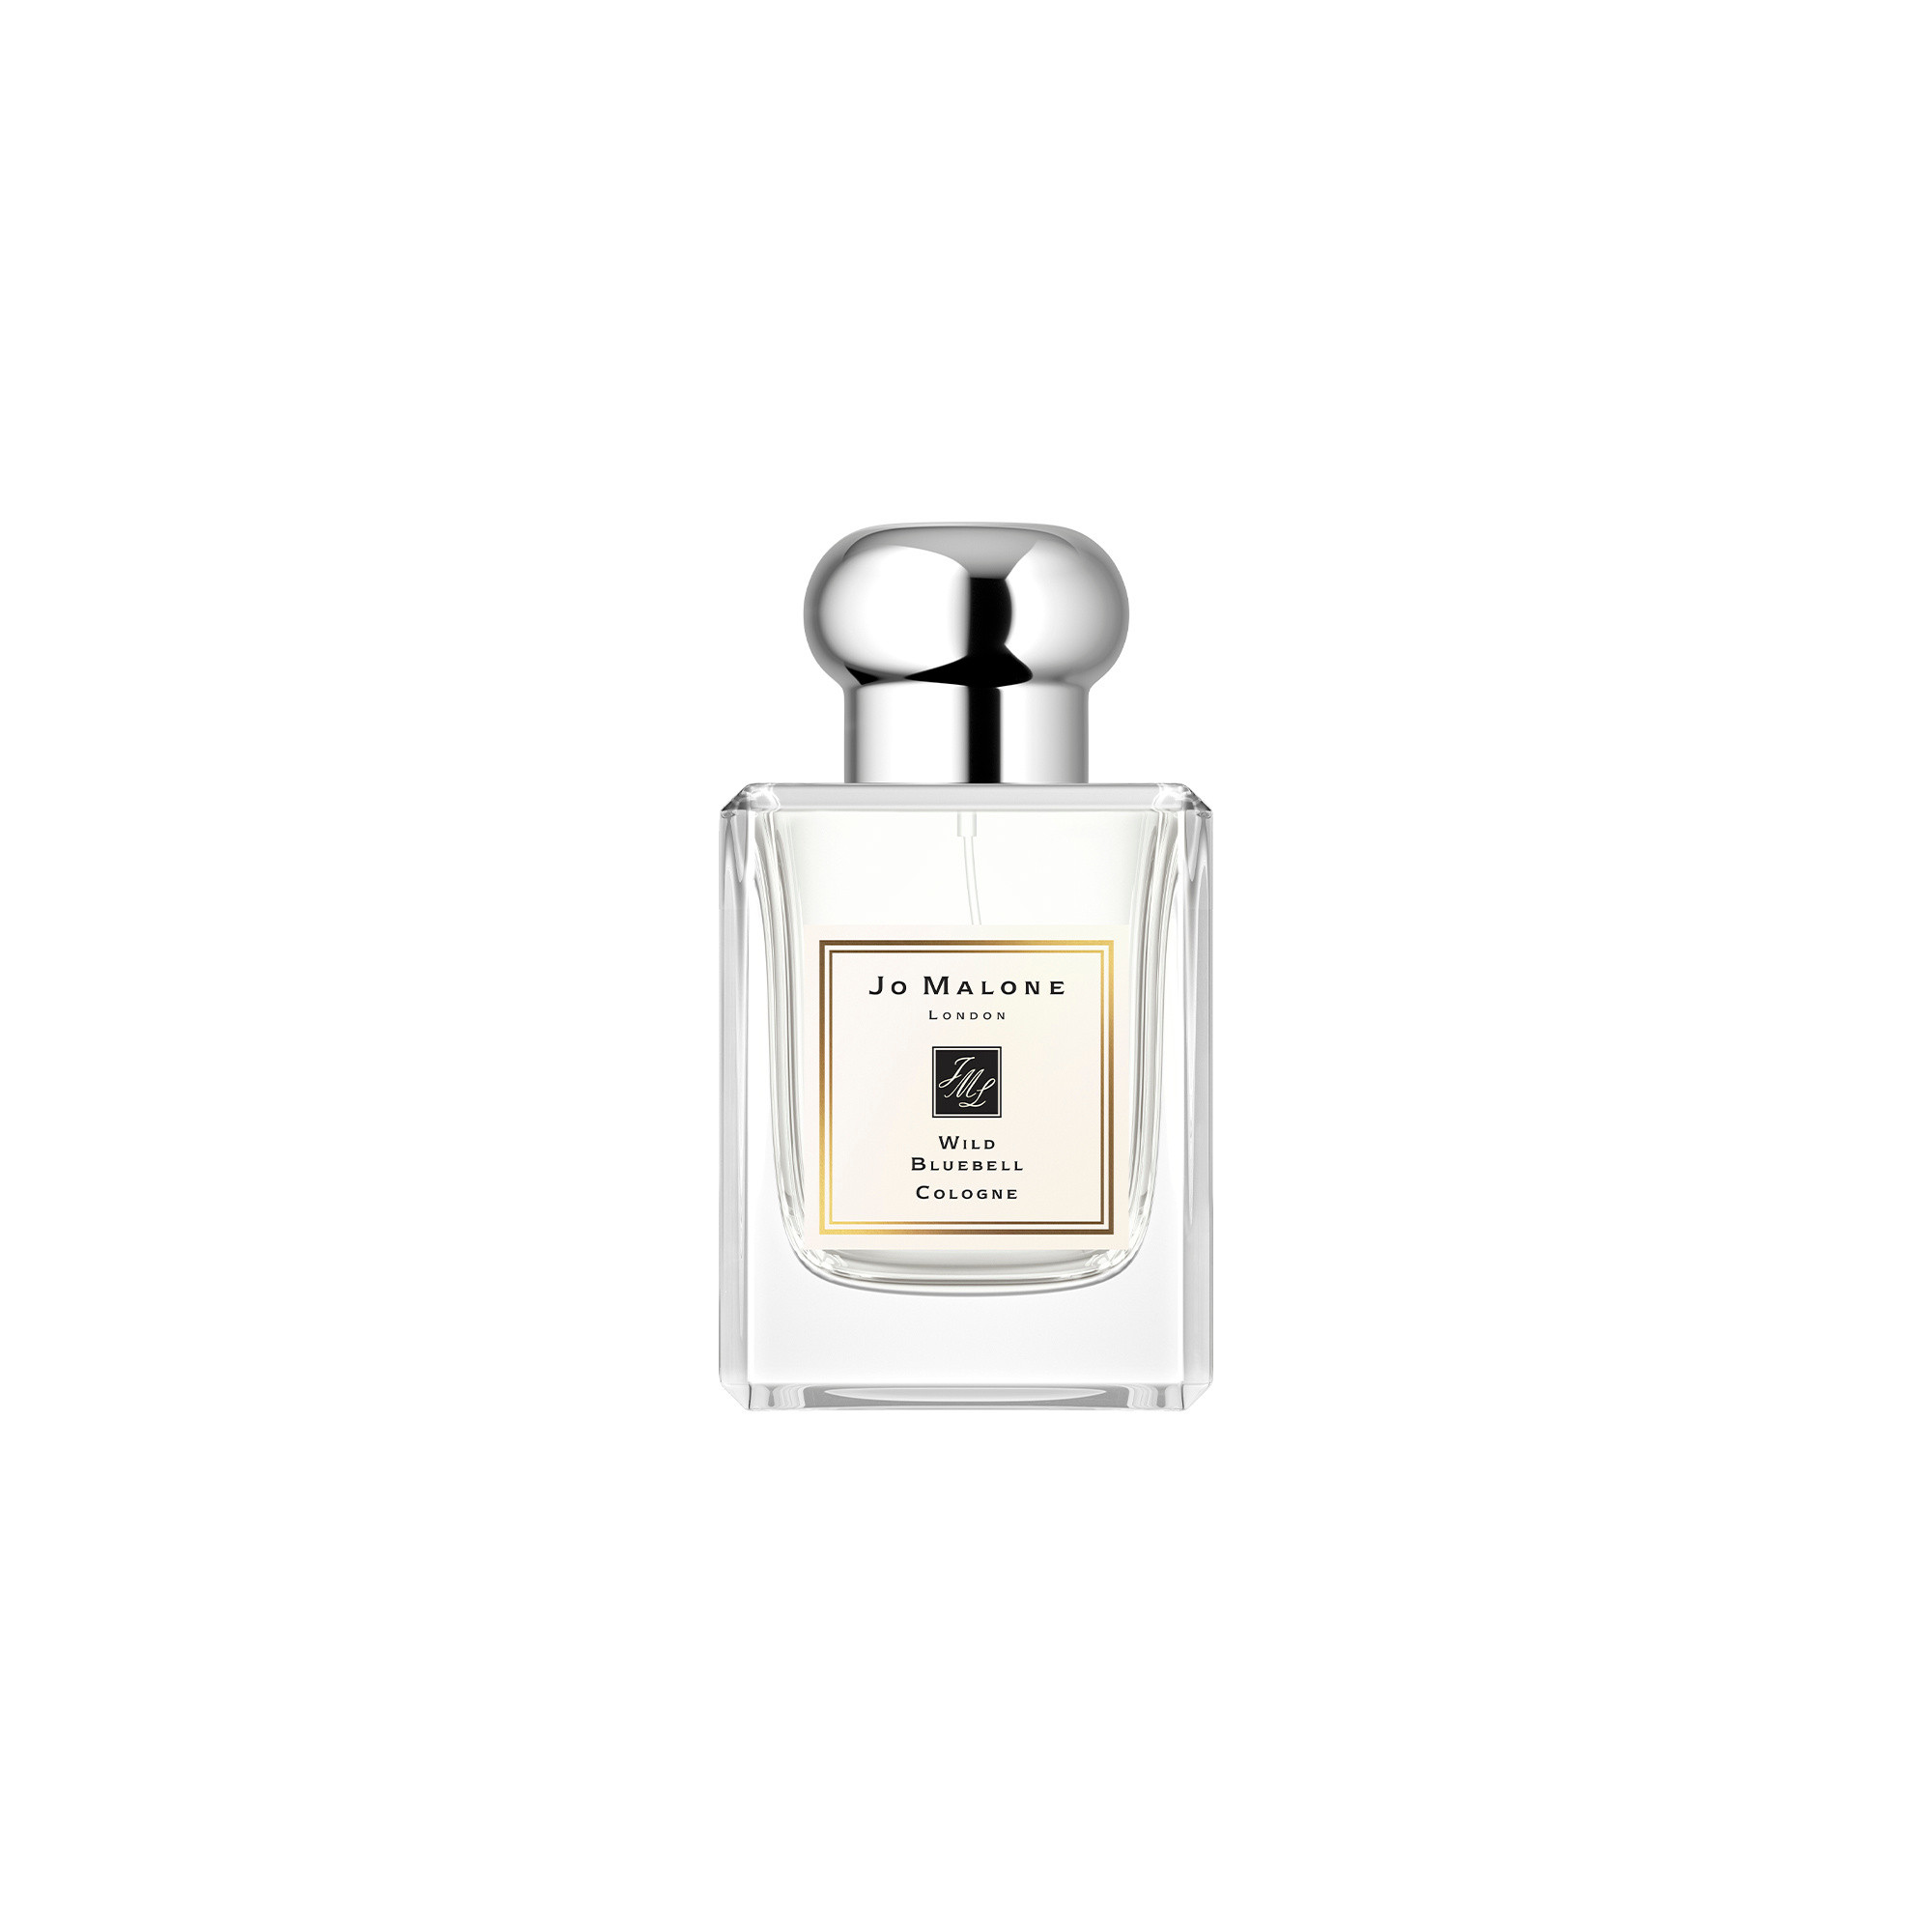 Jo Malone London wild bluebell cologne 50 ml, Beige, large image number 0